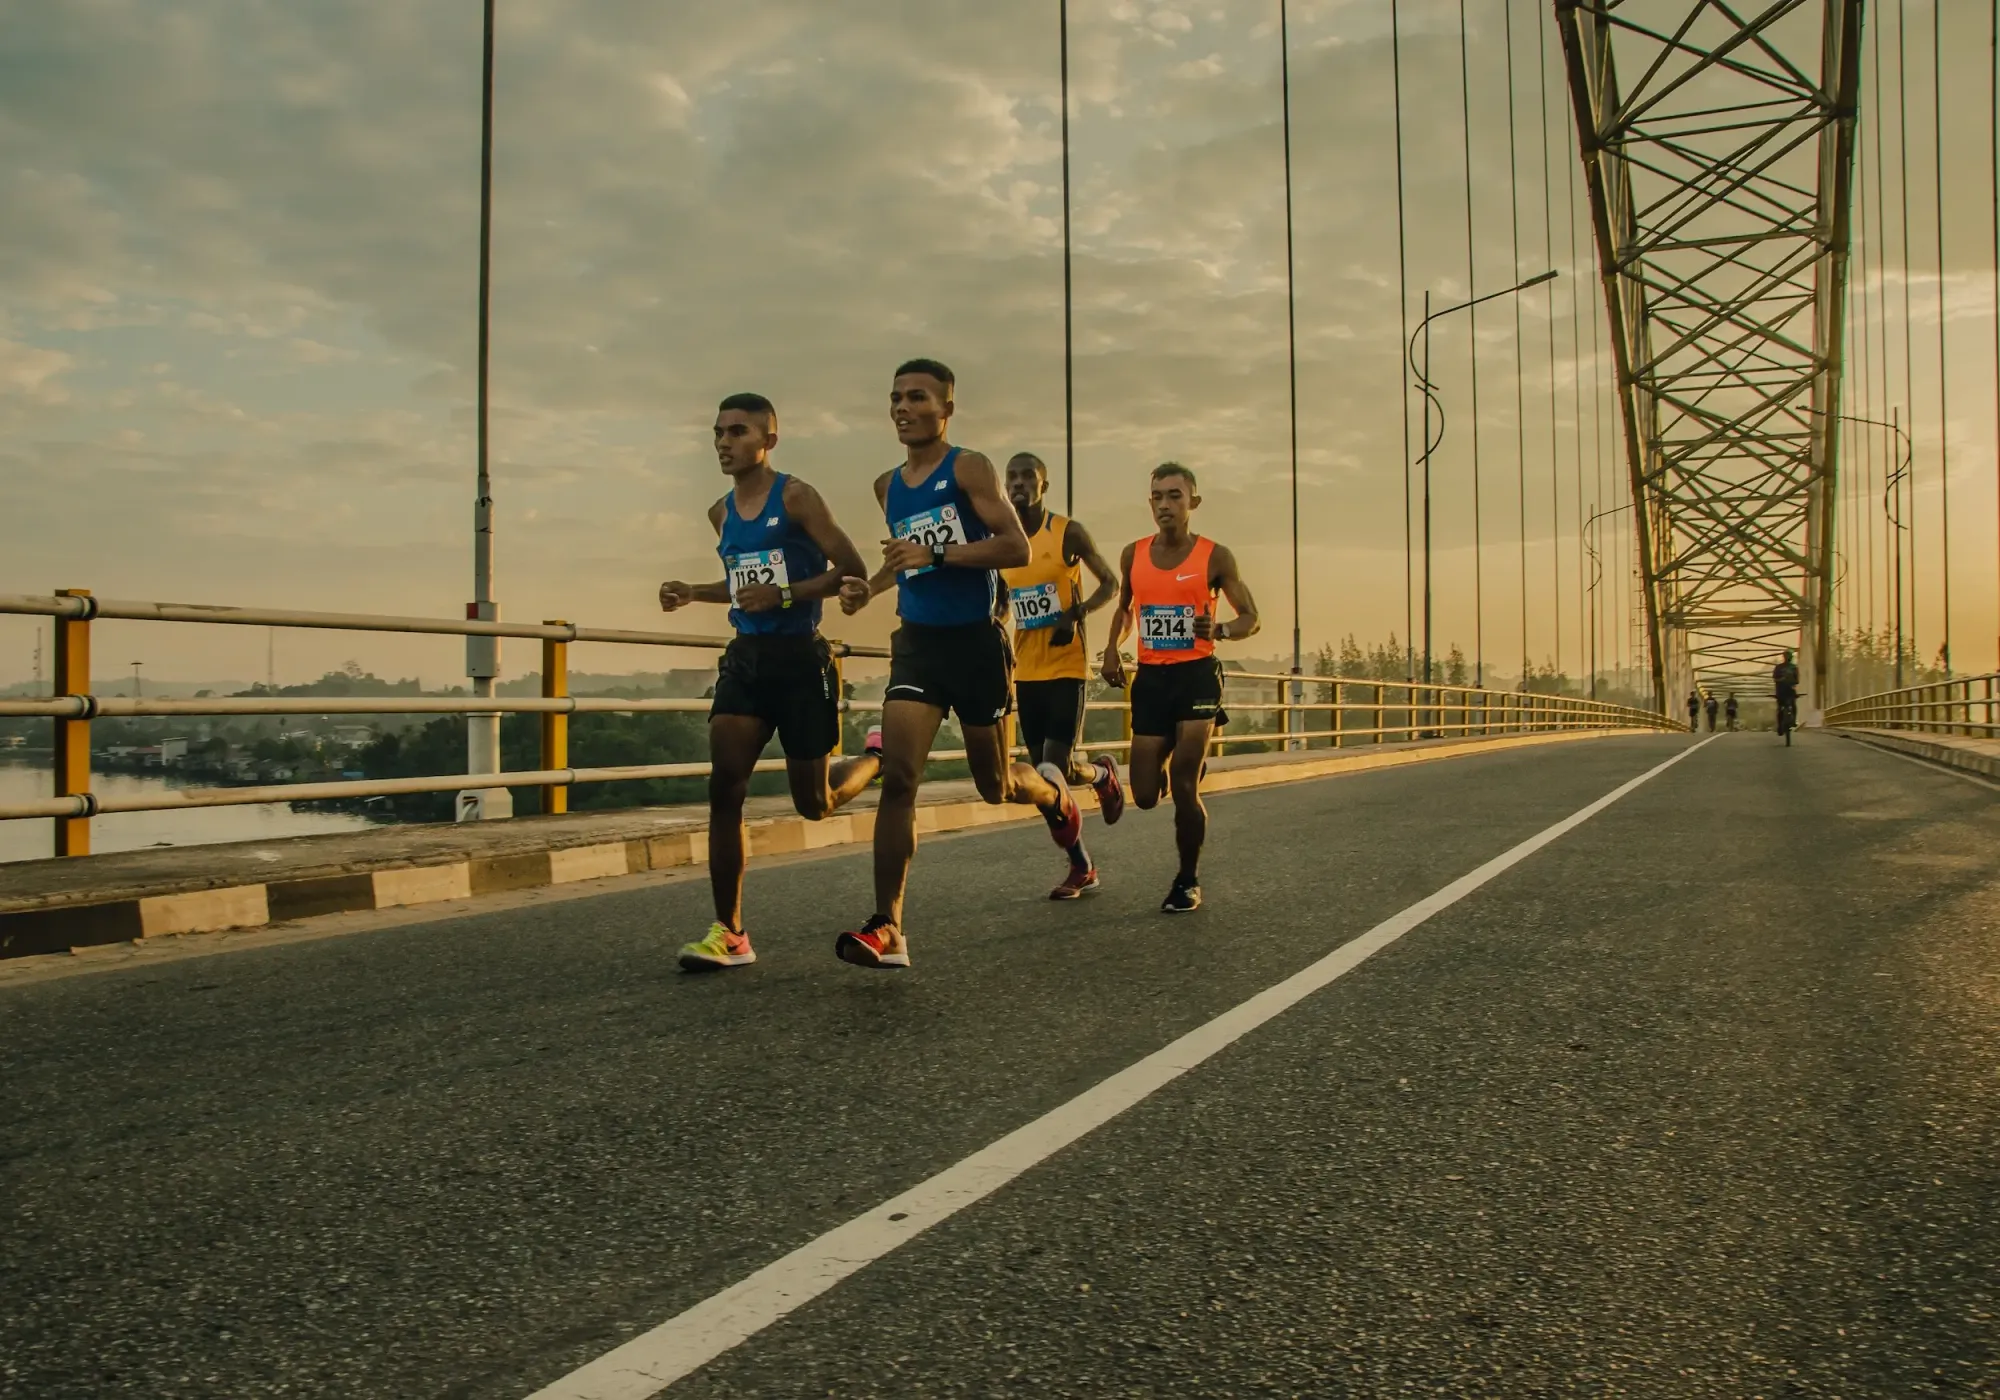 Professional runners on a bridge during a race.